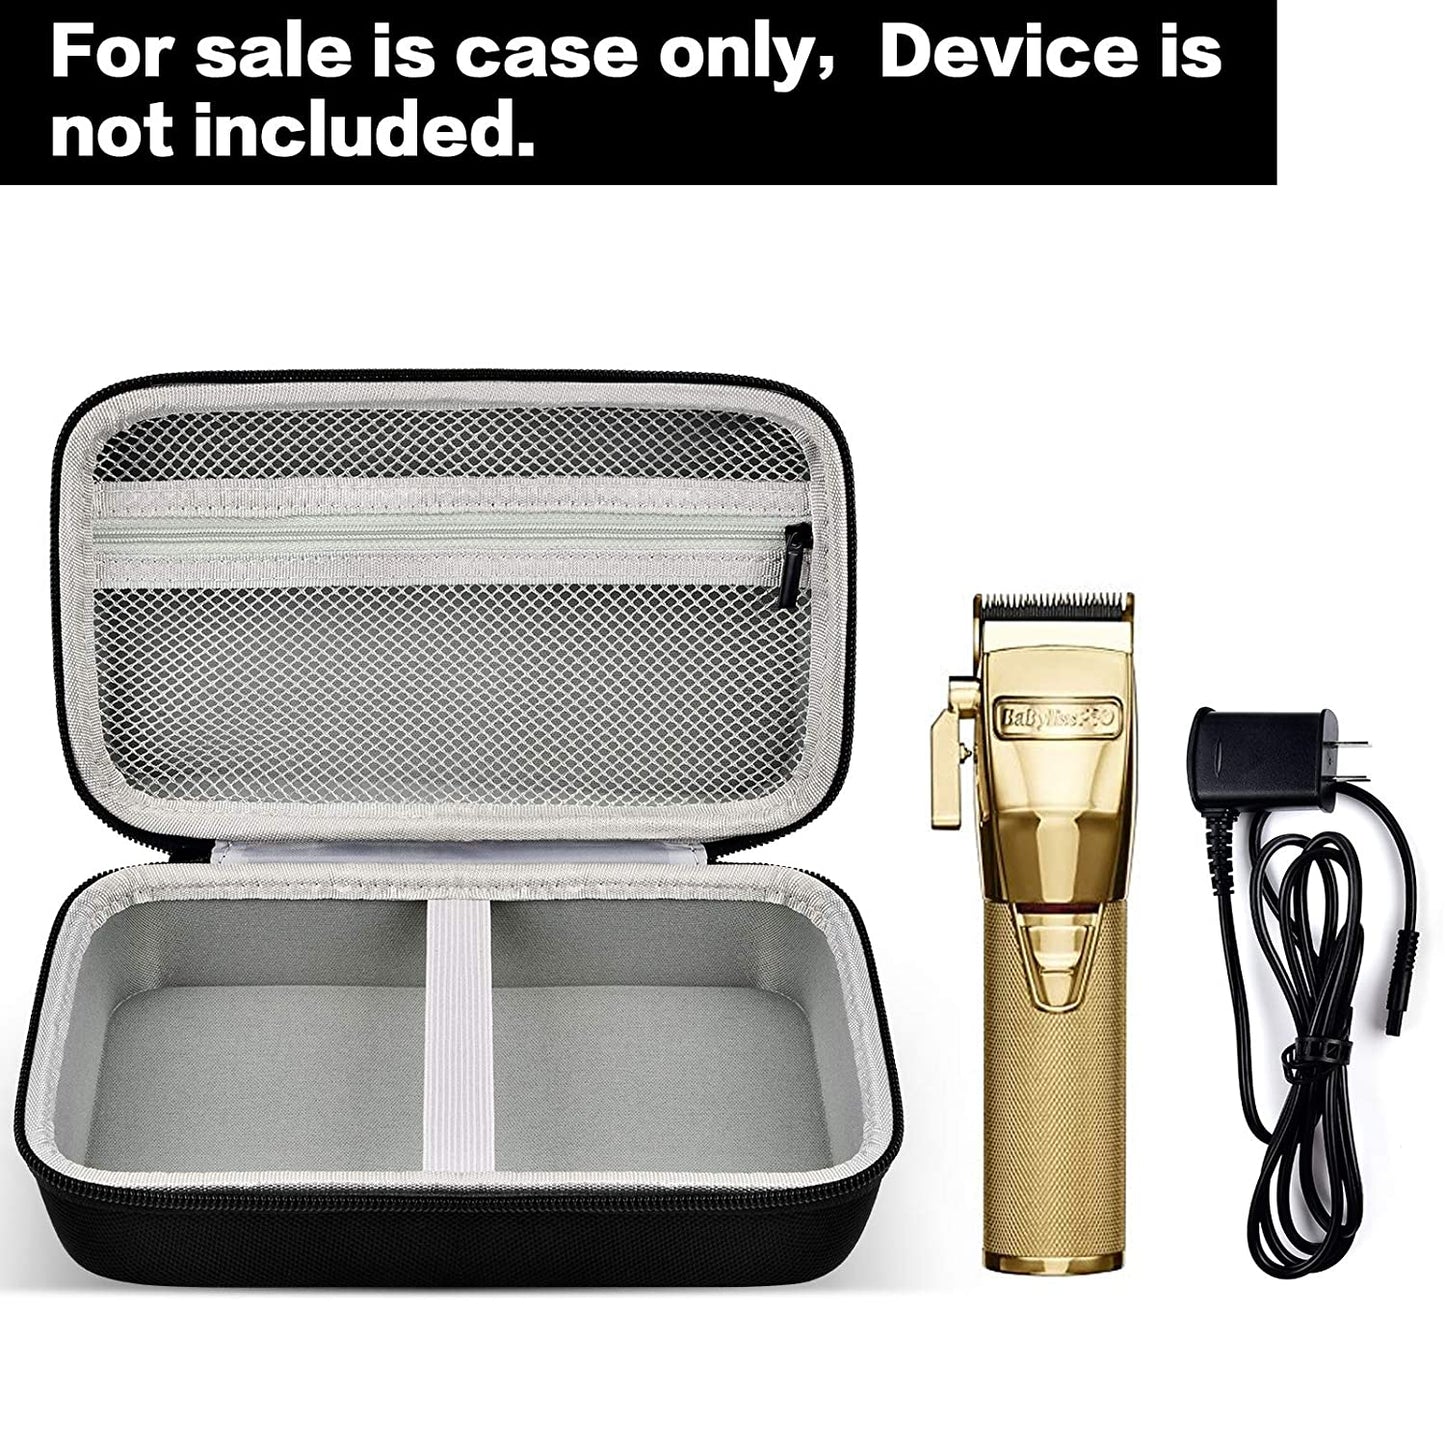 Case Compatible for BaBylissPRO Barberology MetalFX Series - CLIPPER，Travel Carrying Storage Box with Mesh Pocket for Oil, Blade Cover, Charger, Brush and More Accessories.